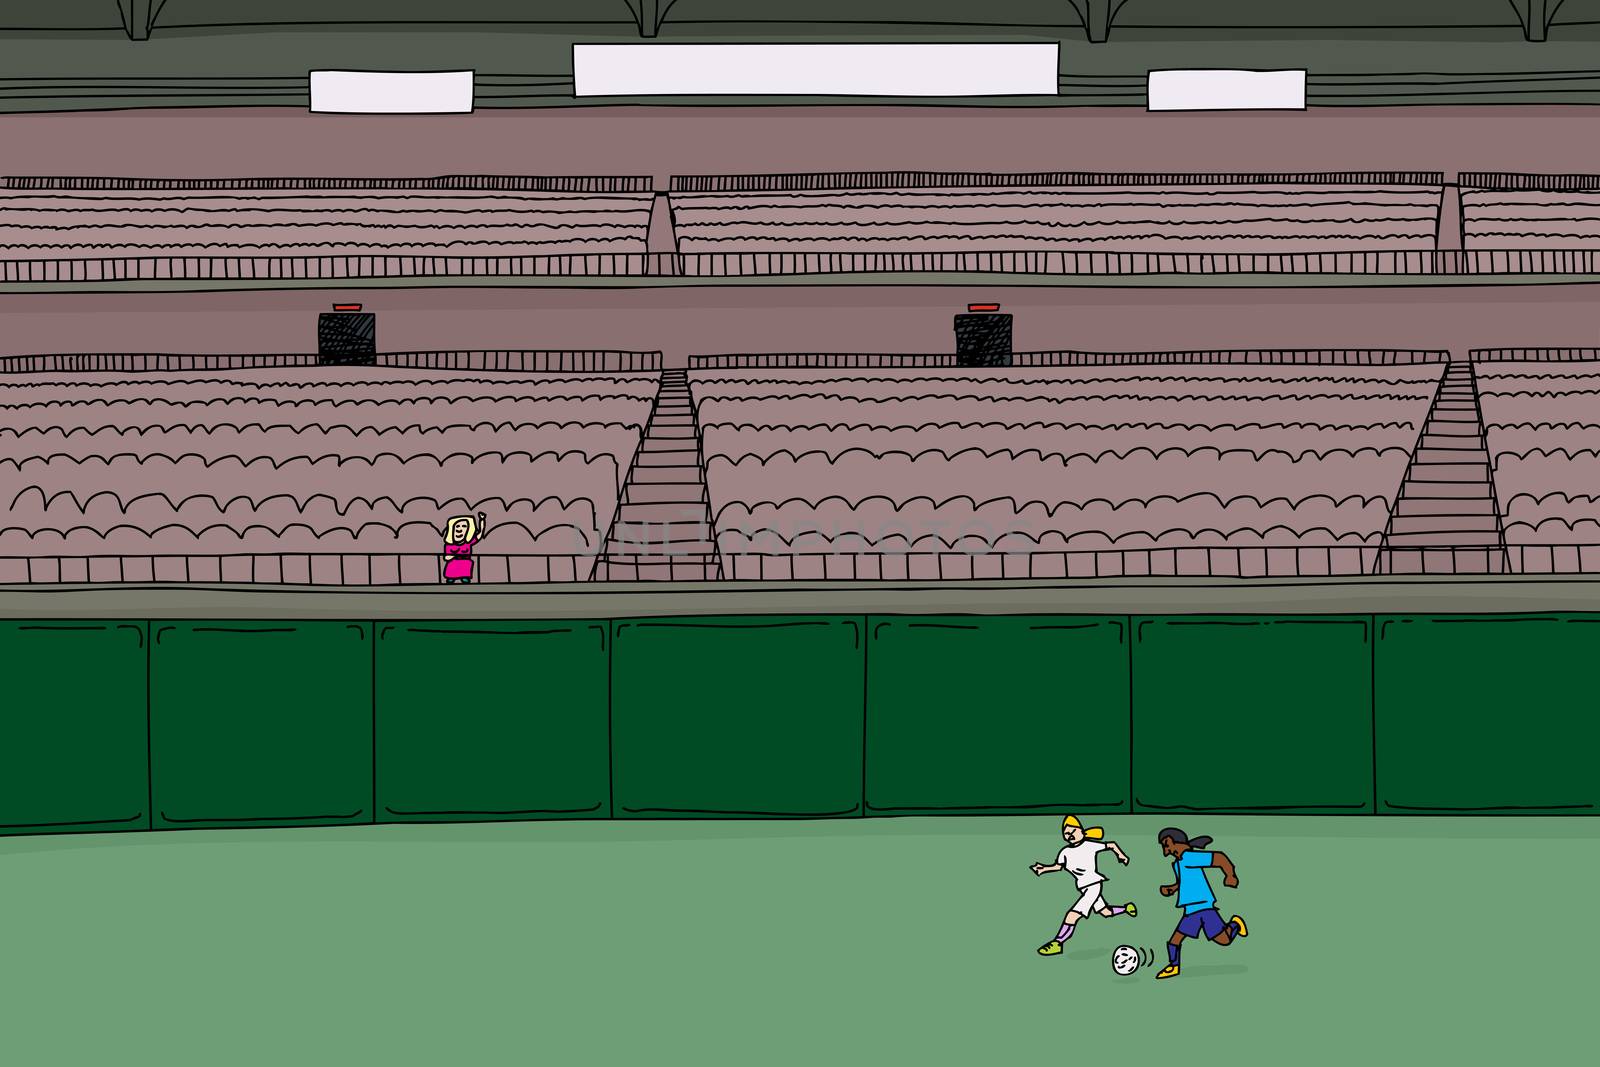 Doodle cartoon of empty stadium with single waving fan and two soccer players chasing a ball